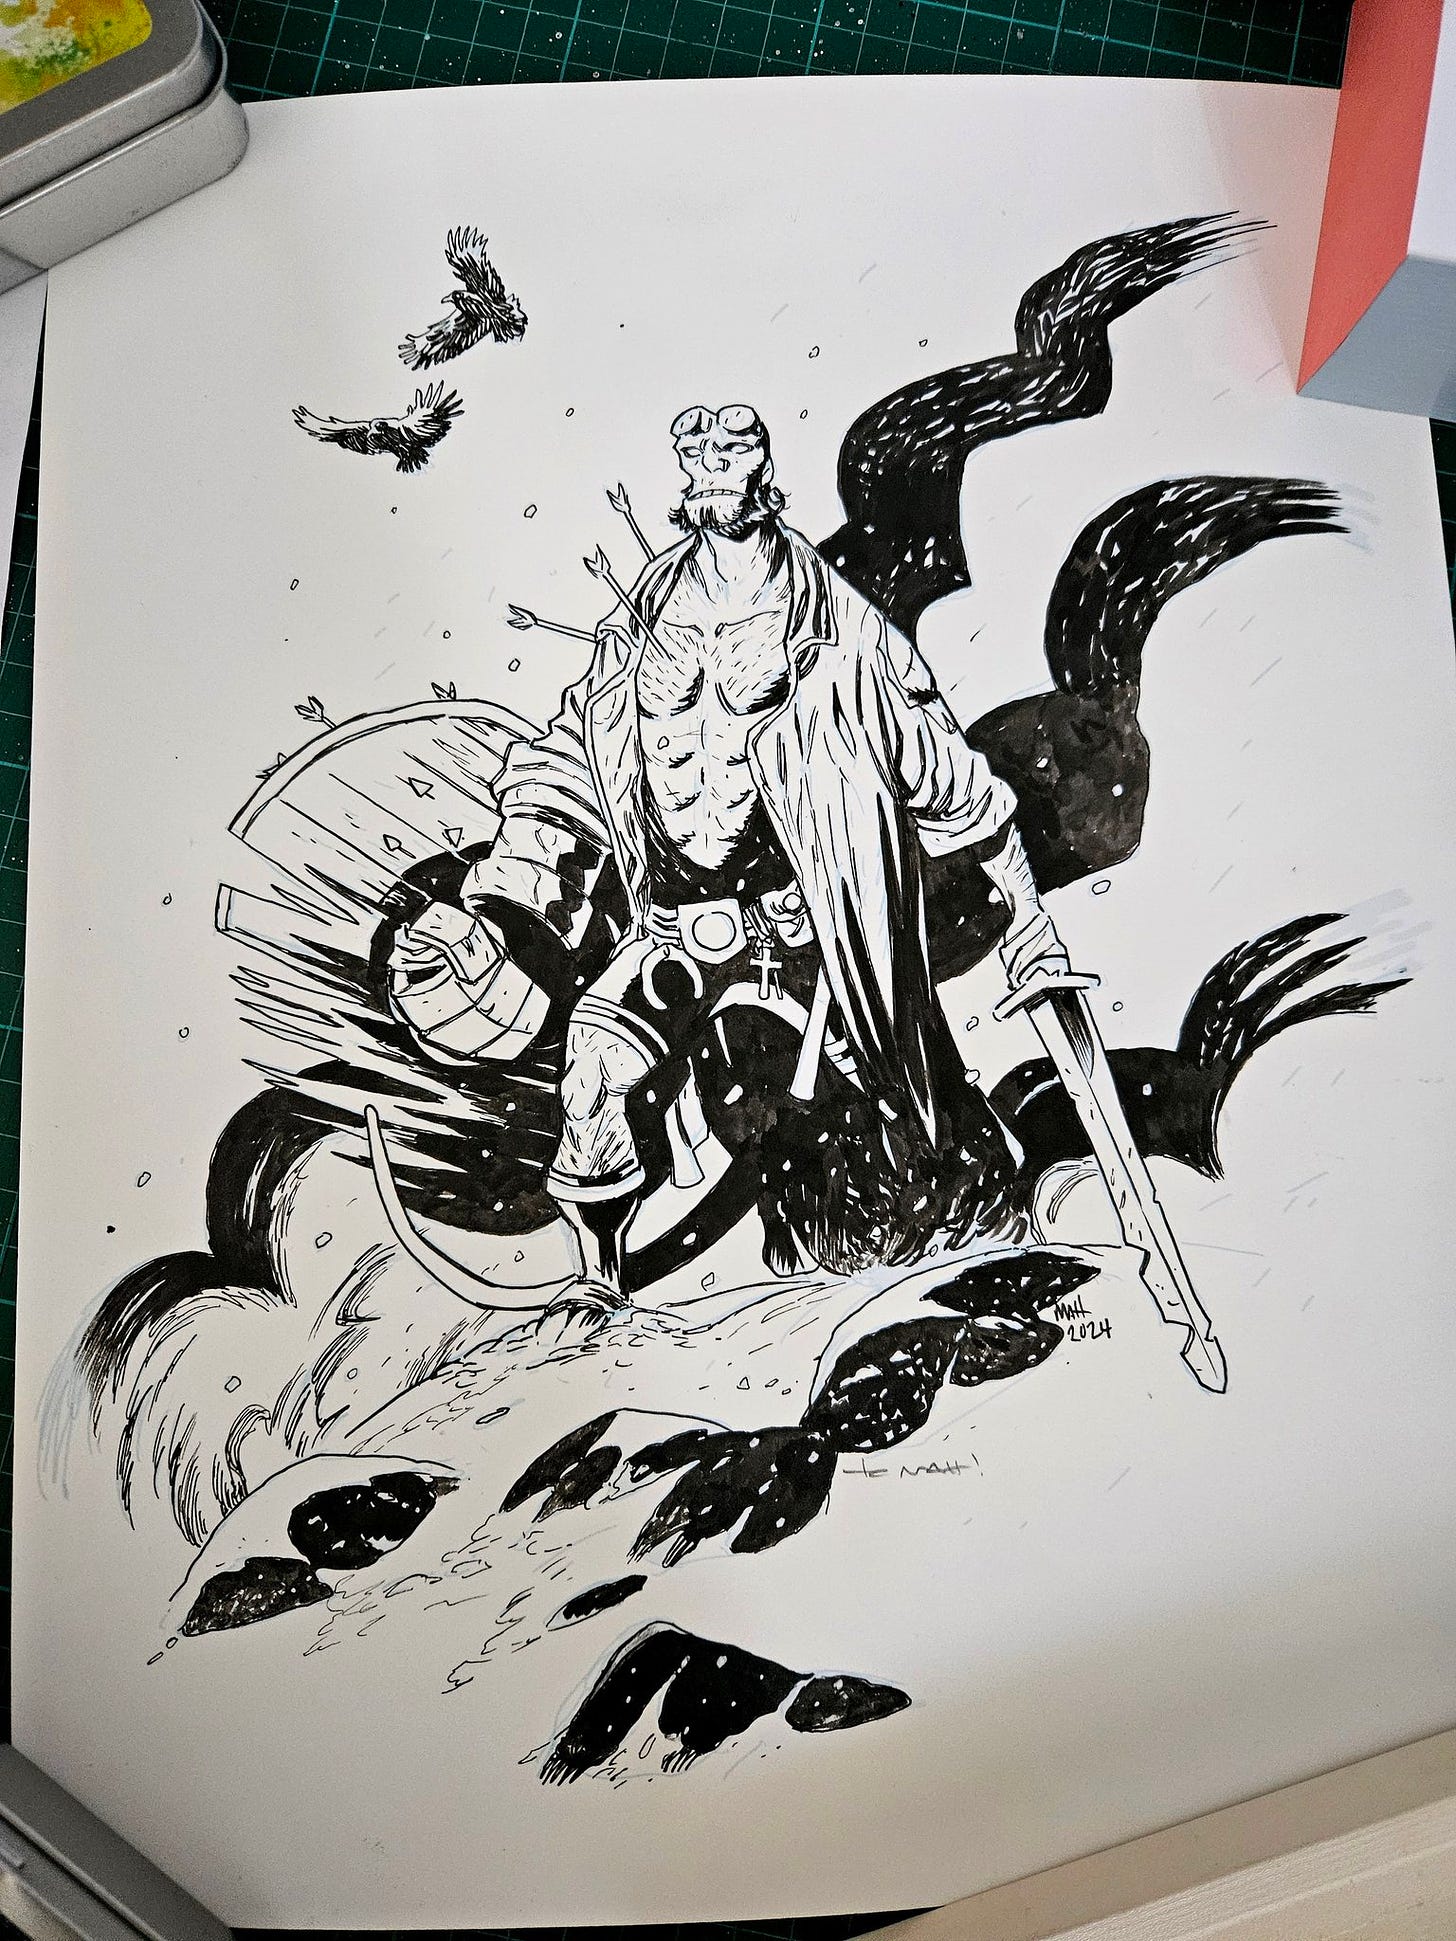 An ink drawing of the comic character Hellboy, holding a busted up shield and sword.